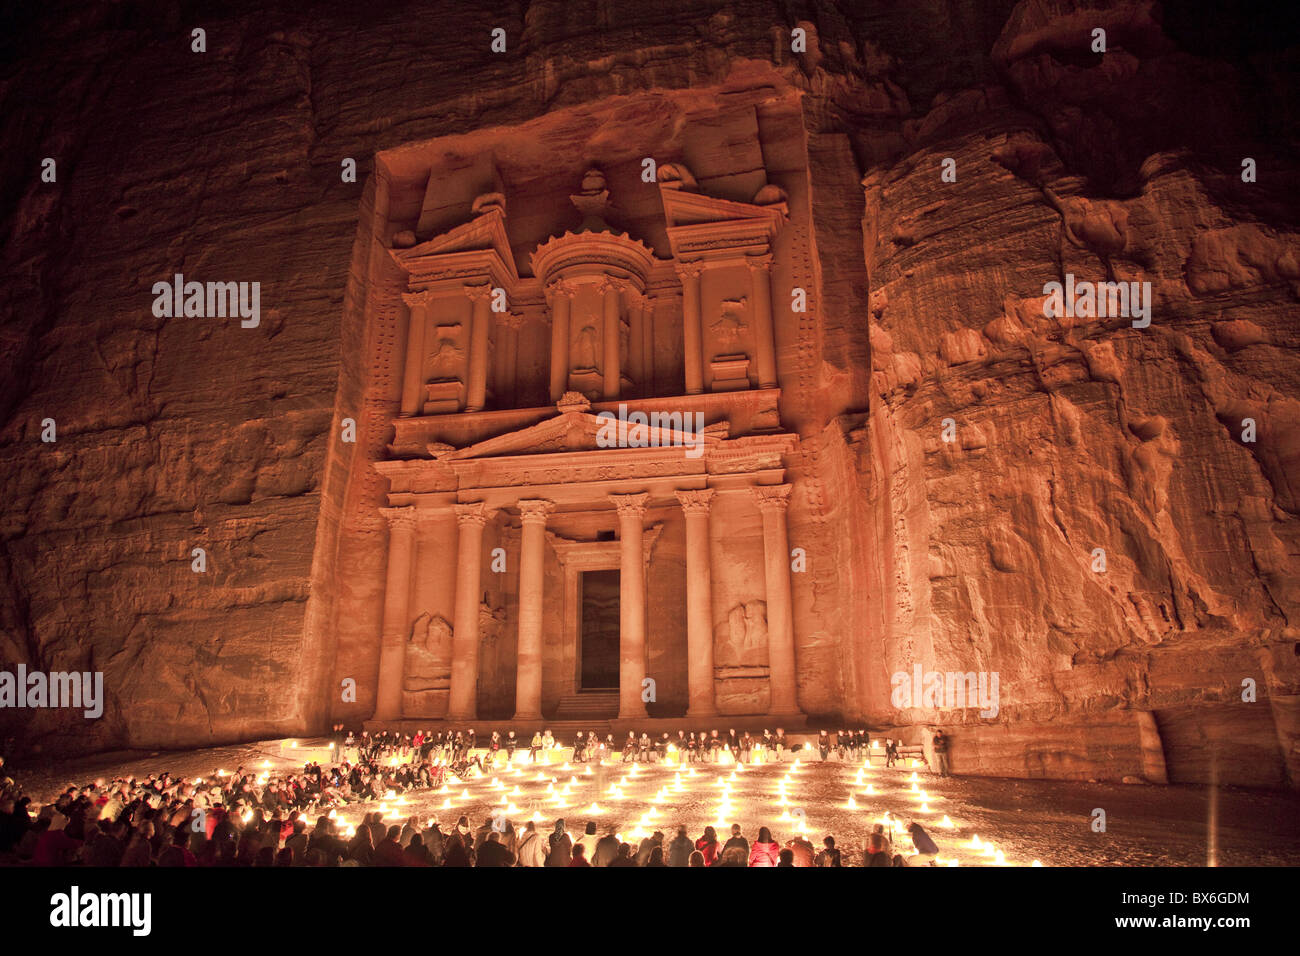 Nightime tourist show in candlelight, in front of the Treasury (El Khazneh), Petra, UNESCO World Heritage Site, Jordan Stock Photo